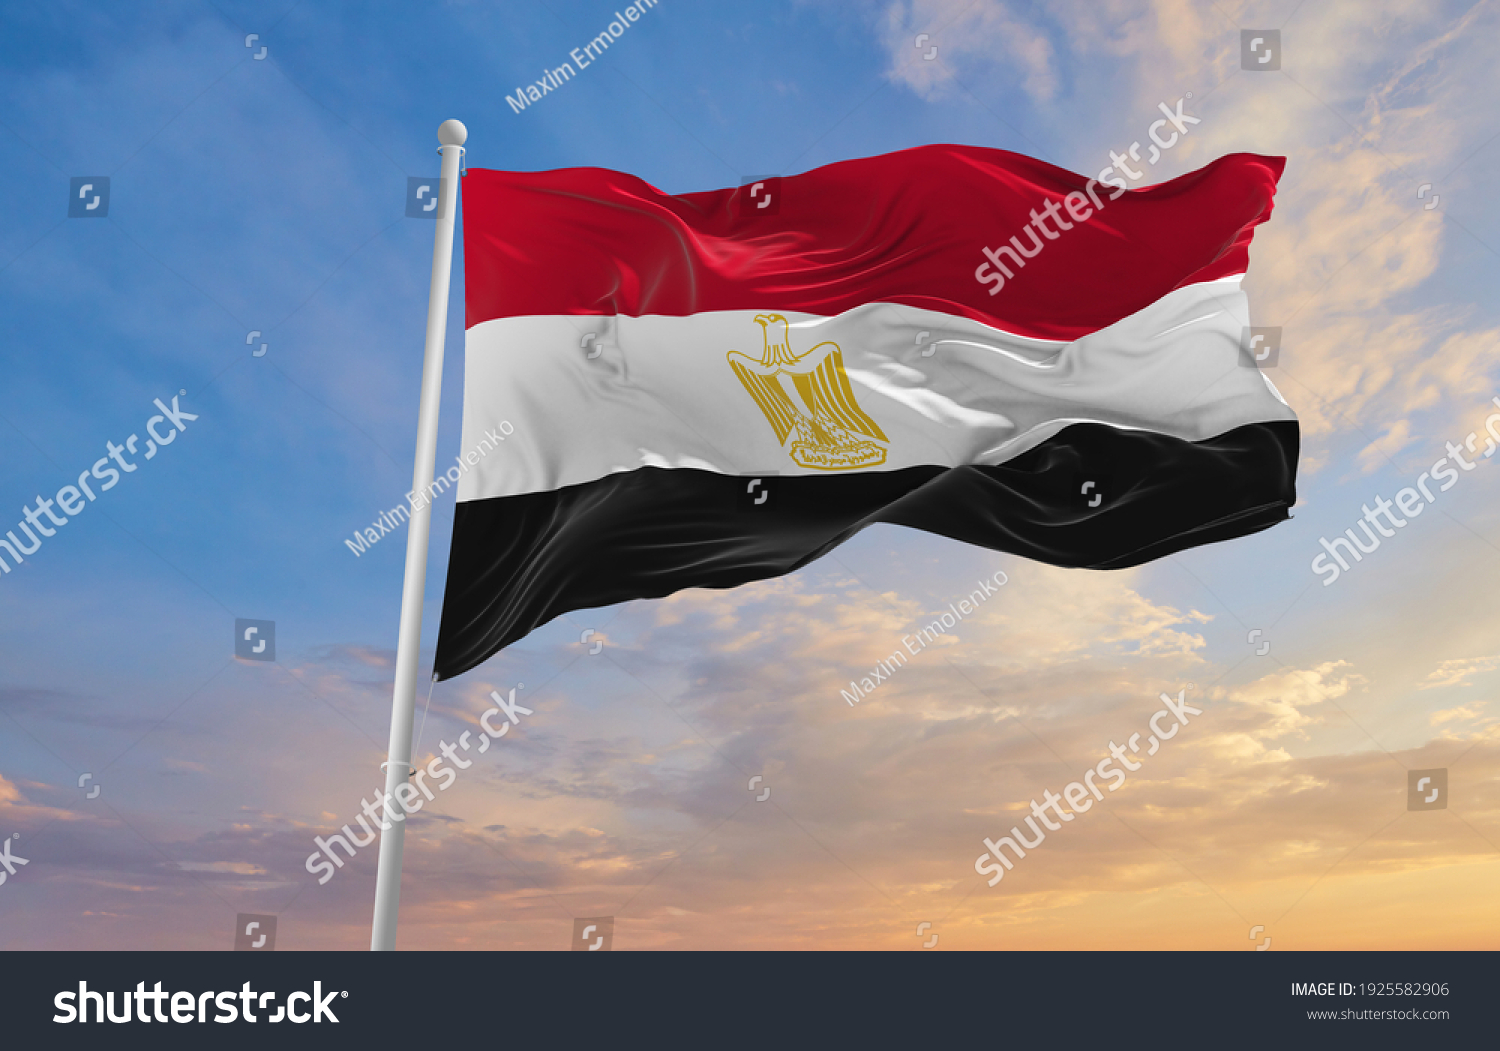 Large flag of Egypt waving in the wind #1925582906